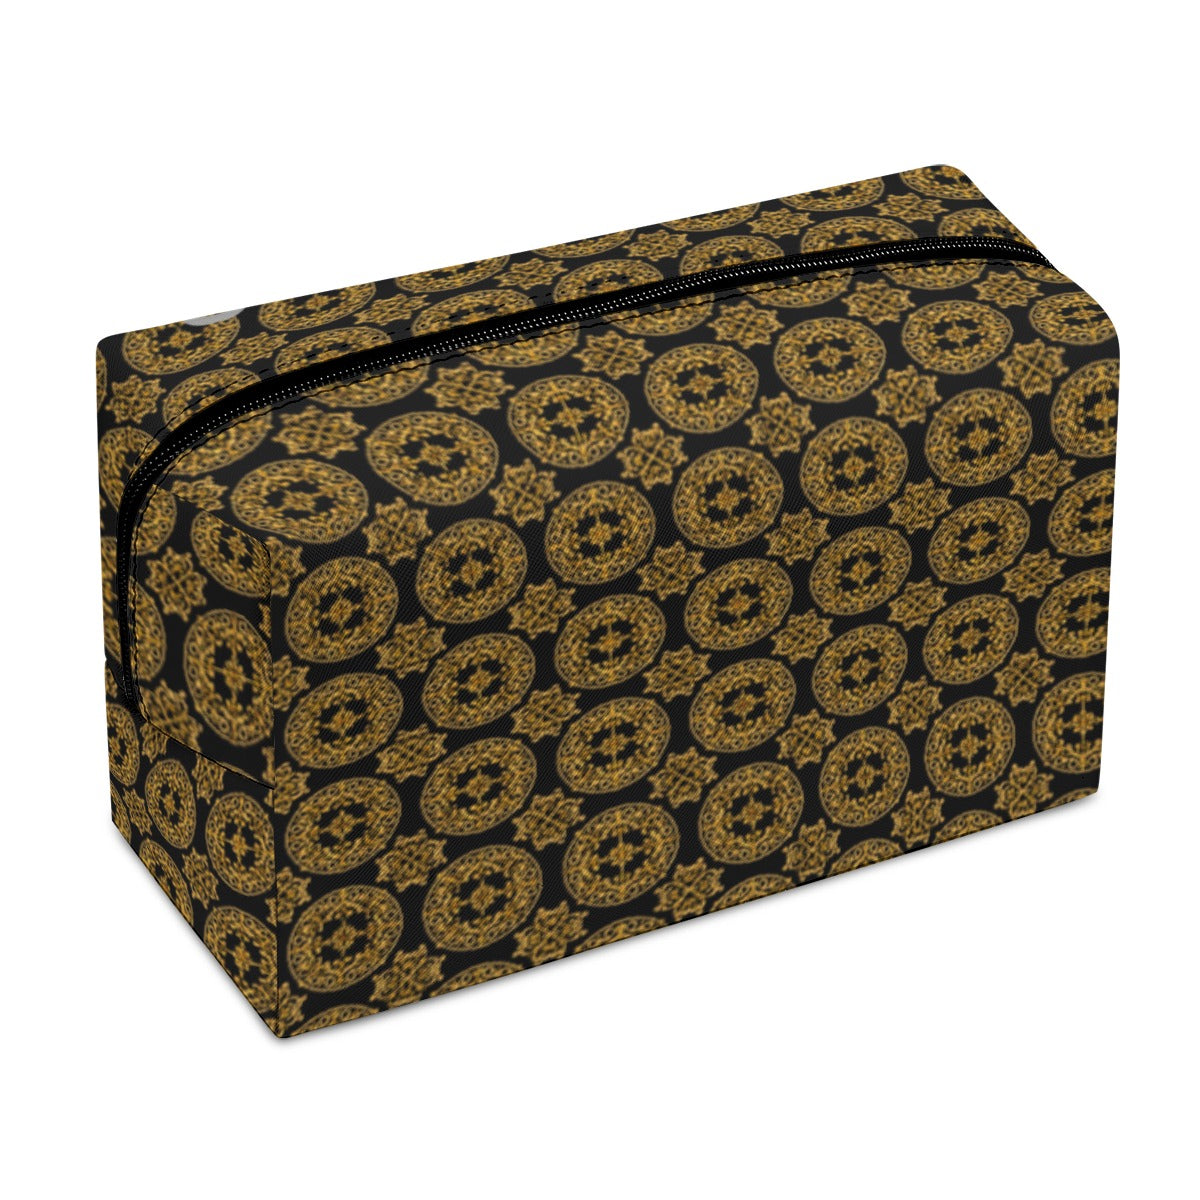 OUPE AC BAROQUE "PALACE" TOILETRY BAG II